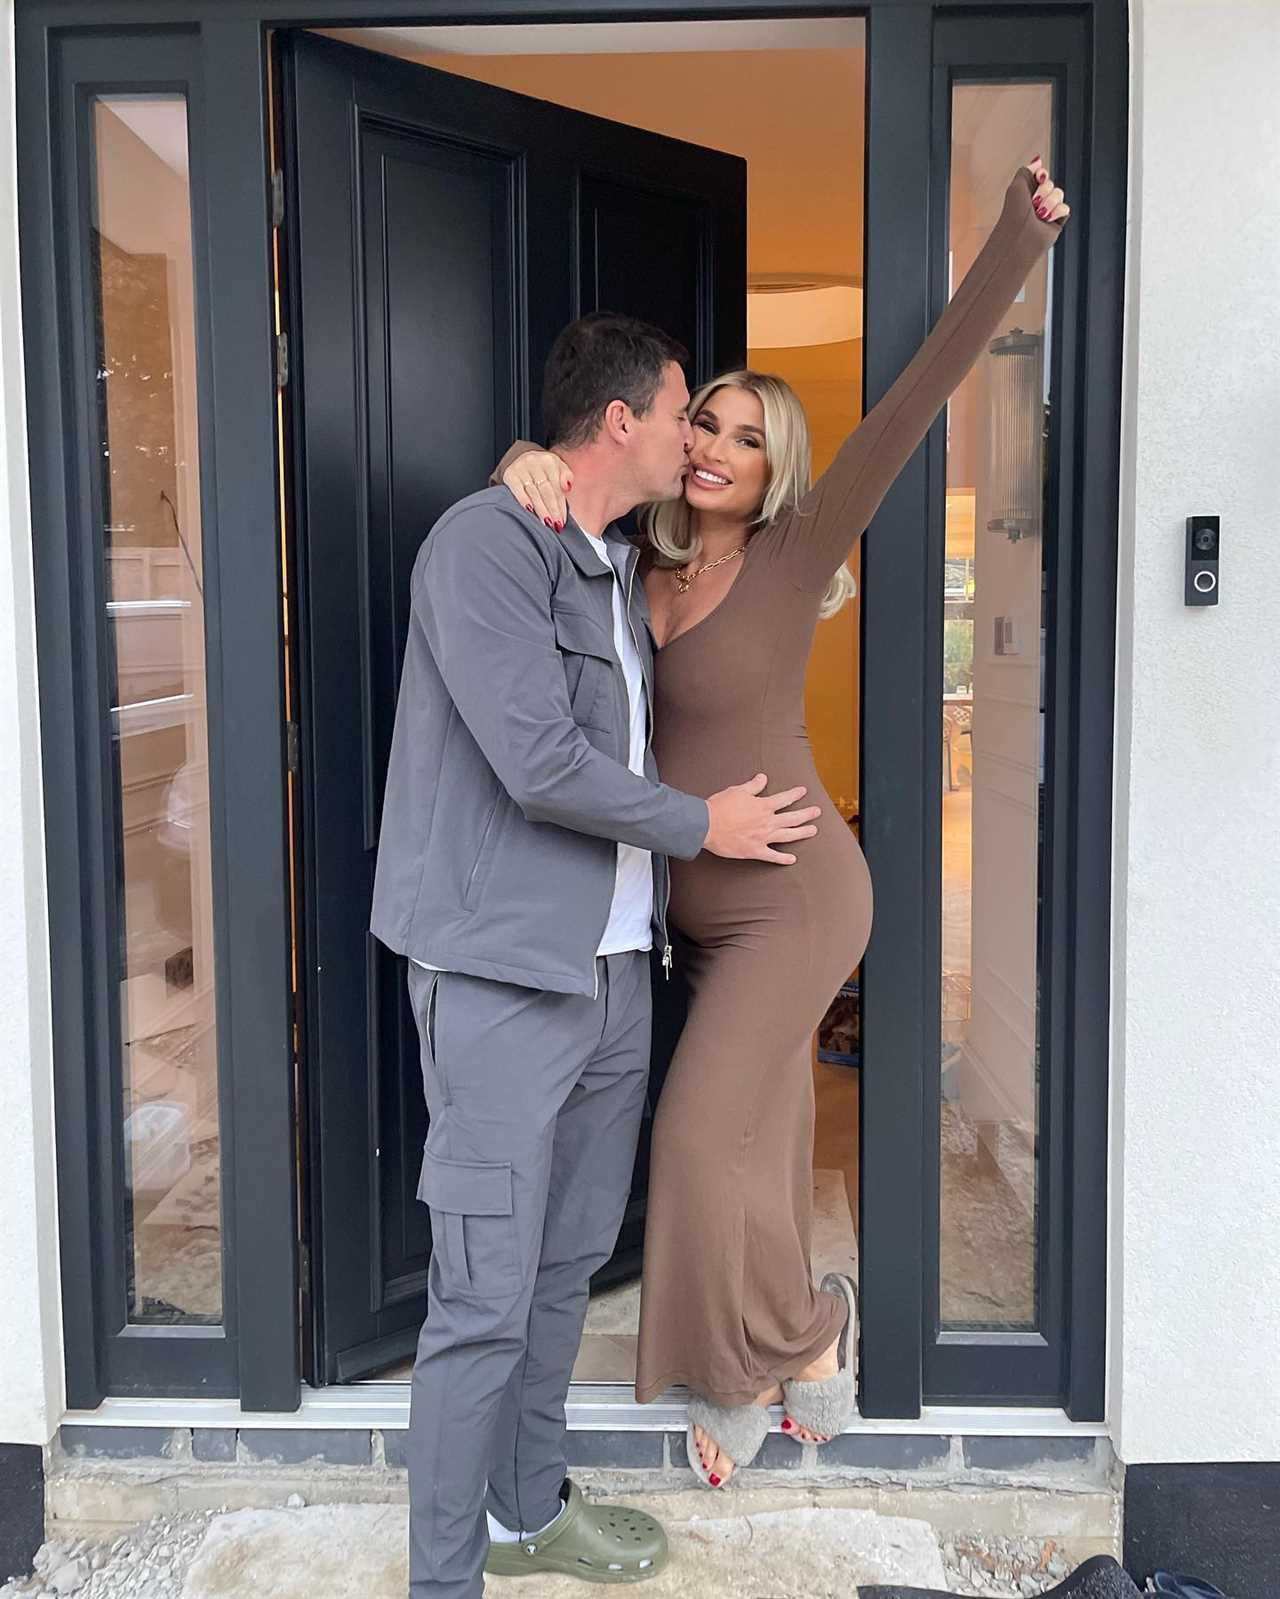 Billie Faiers opens up about Christmas day plans – and it won’t be at her brand new £1.4m mansion